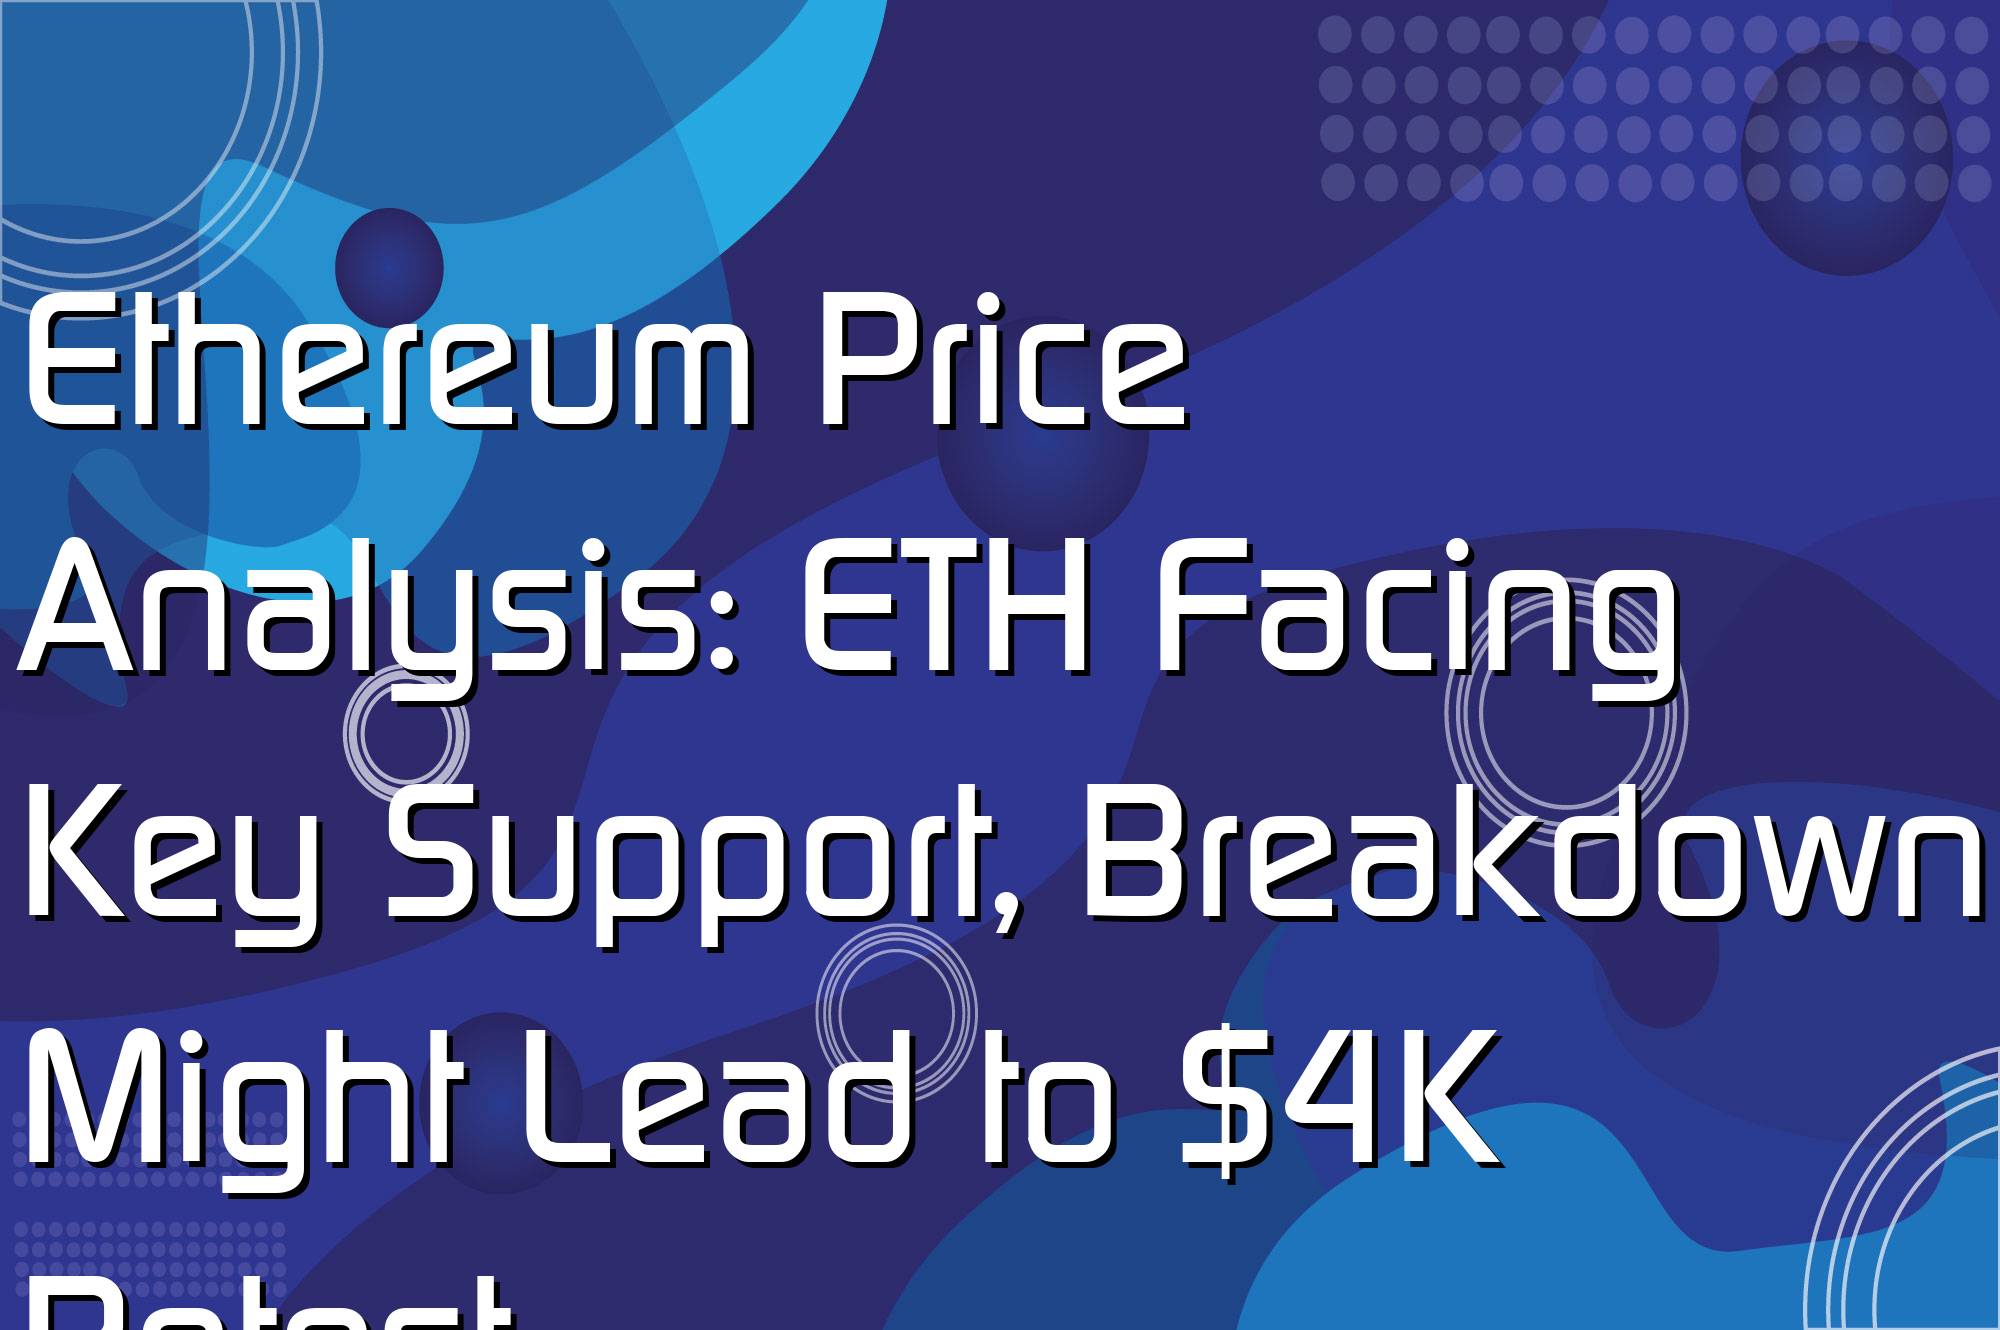 @$65960: Ethereum Price Analysis: ETH Facing Key Support, Breakdown Might Lead to $4K Retest